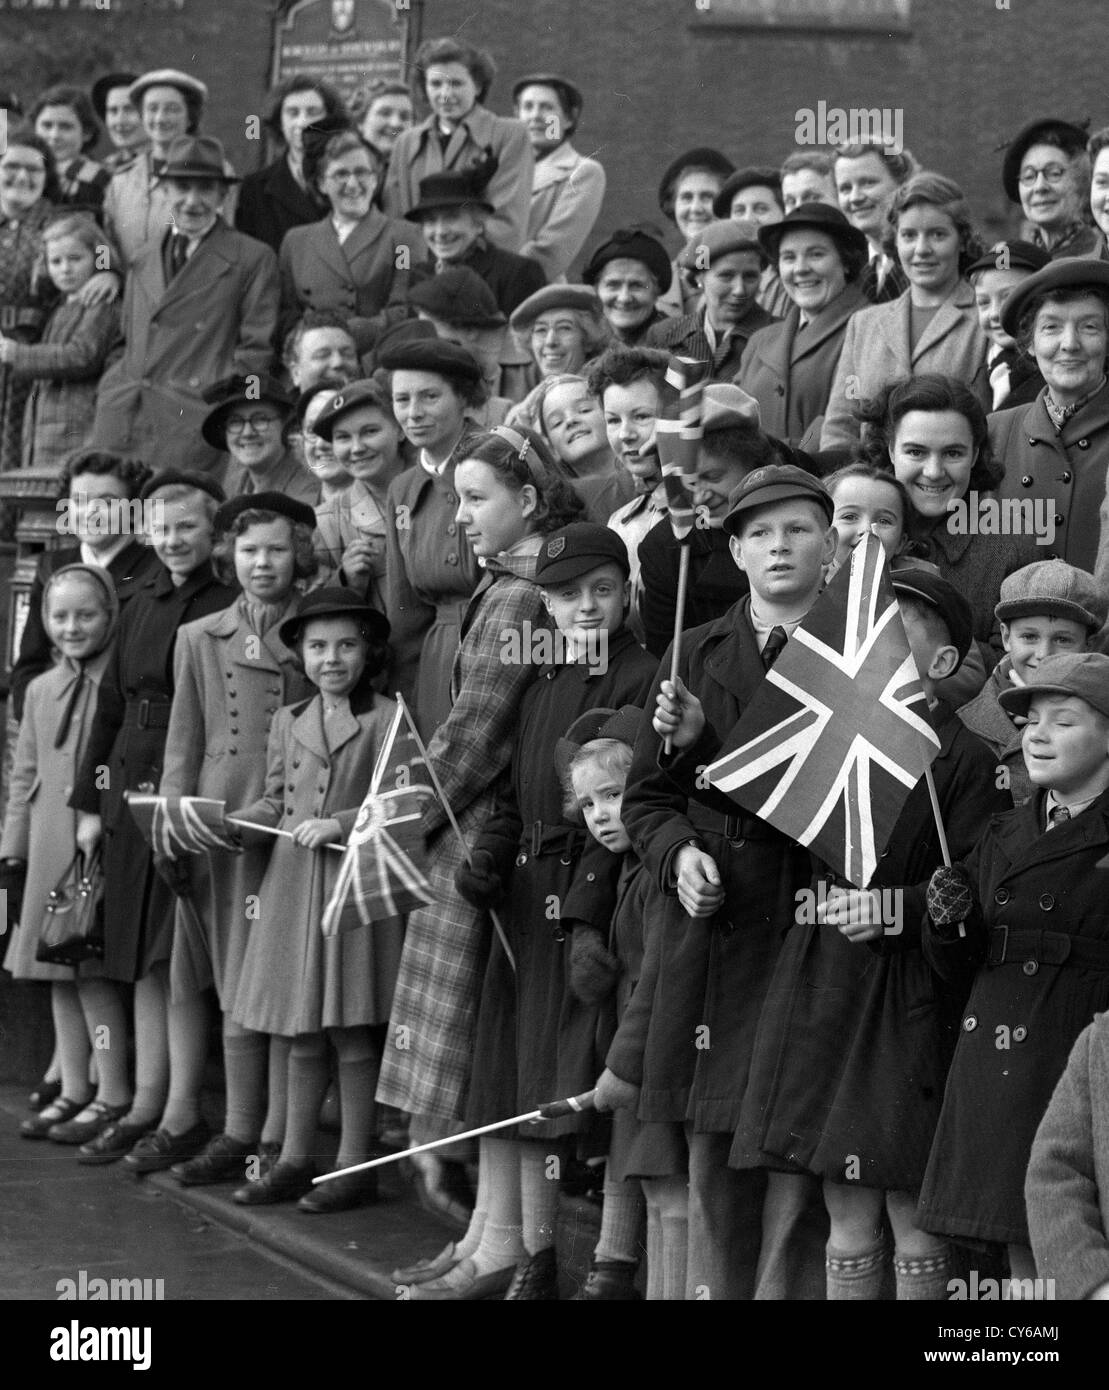 Crowds line the streets for the Queen's visit to Shrewsbury on Friday October 24th 1952. Britain 1950s people school children families royal visit patriotic flag waving royalists Stock Photo